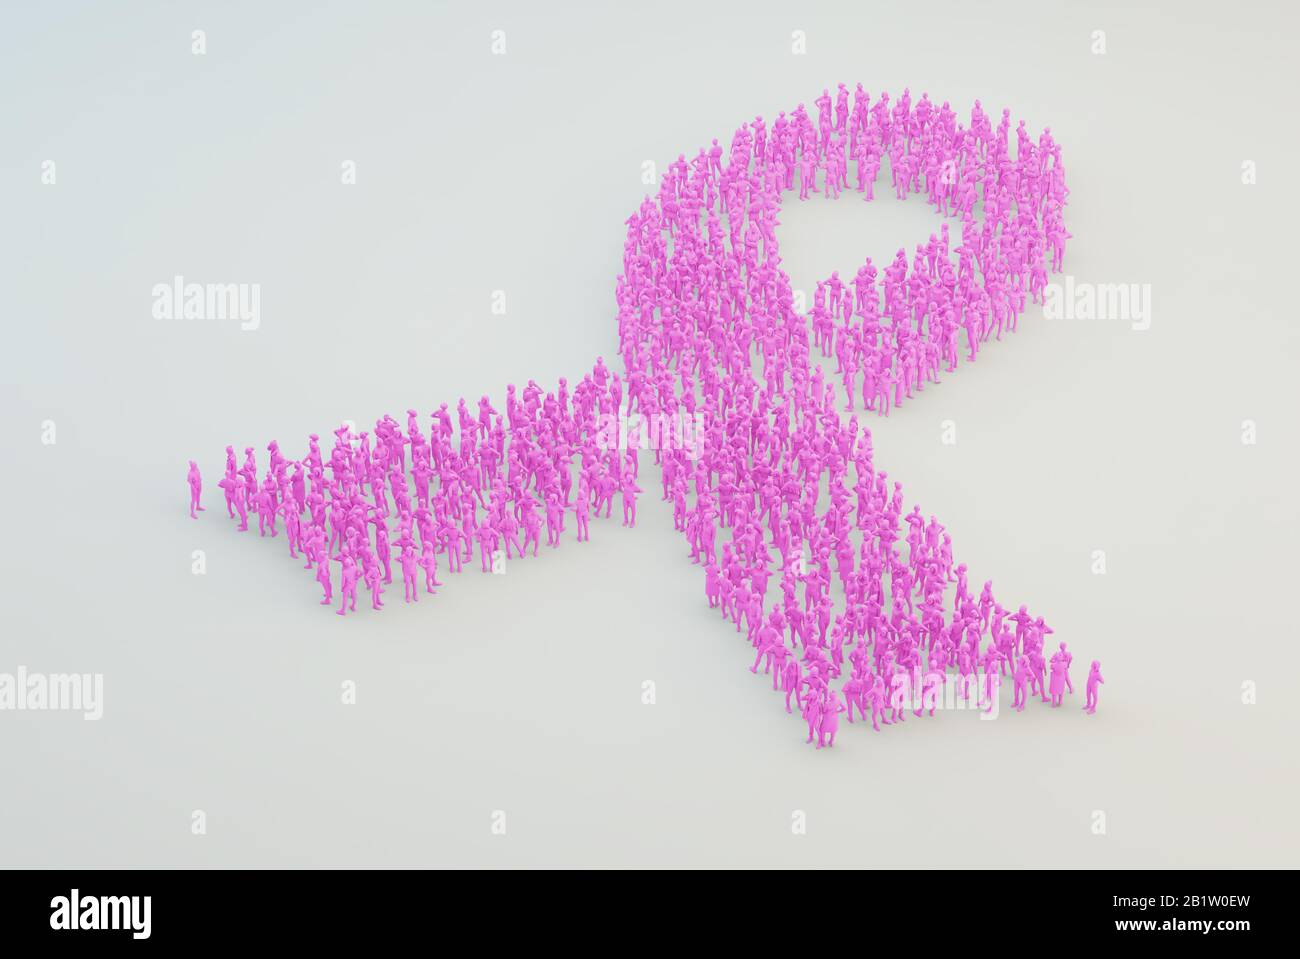 Cancer Awereness Ribbon - 3D illustration of women's health issues Stock Photo